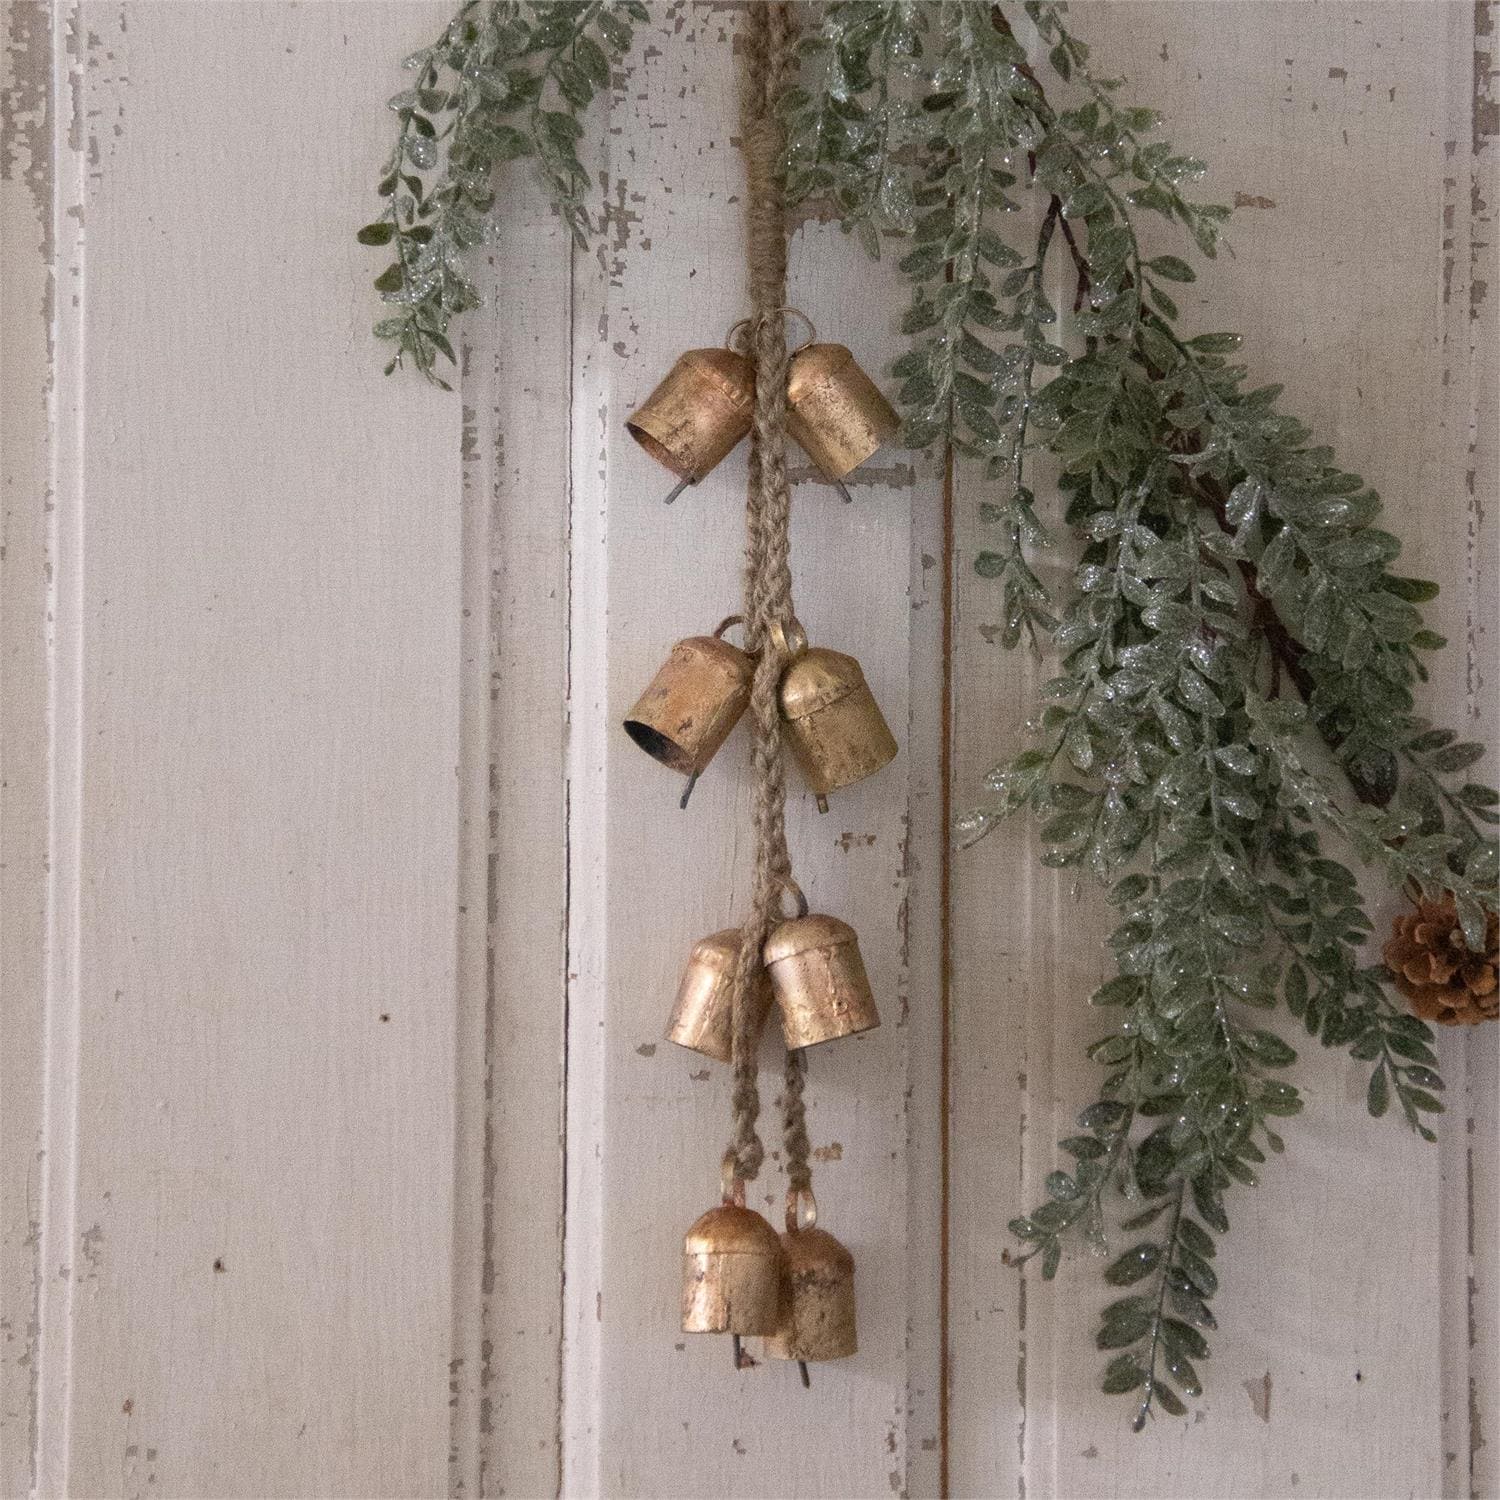 Rustic Brass Bells with Jute Hanger - Canvas n' Decor Canada